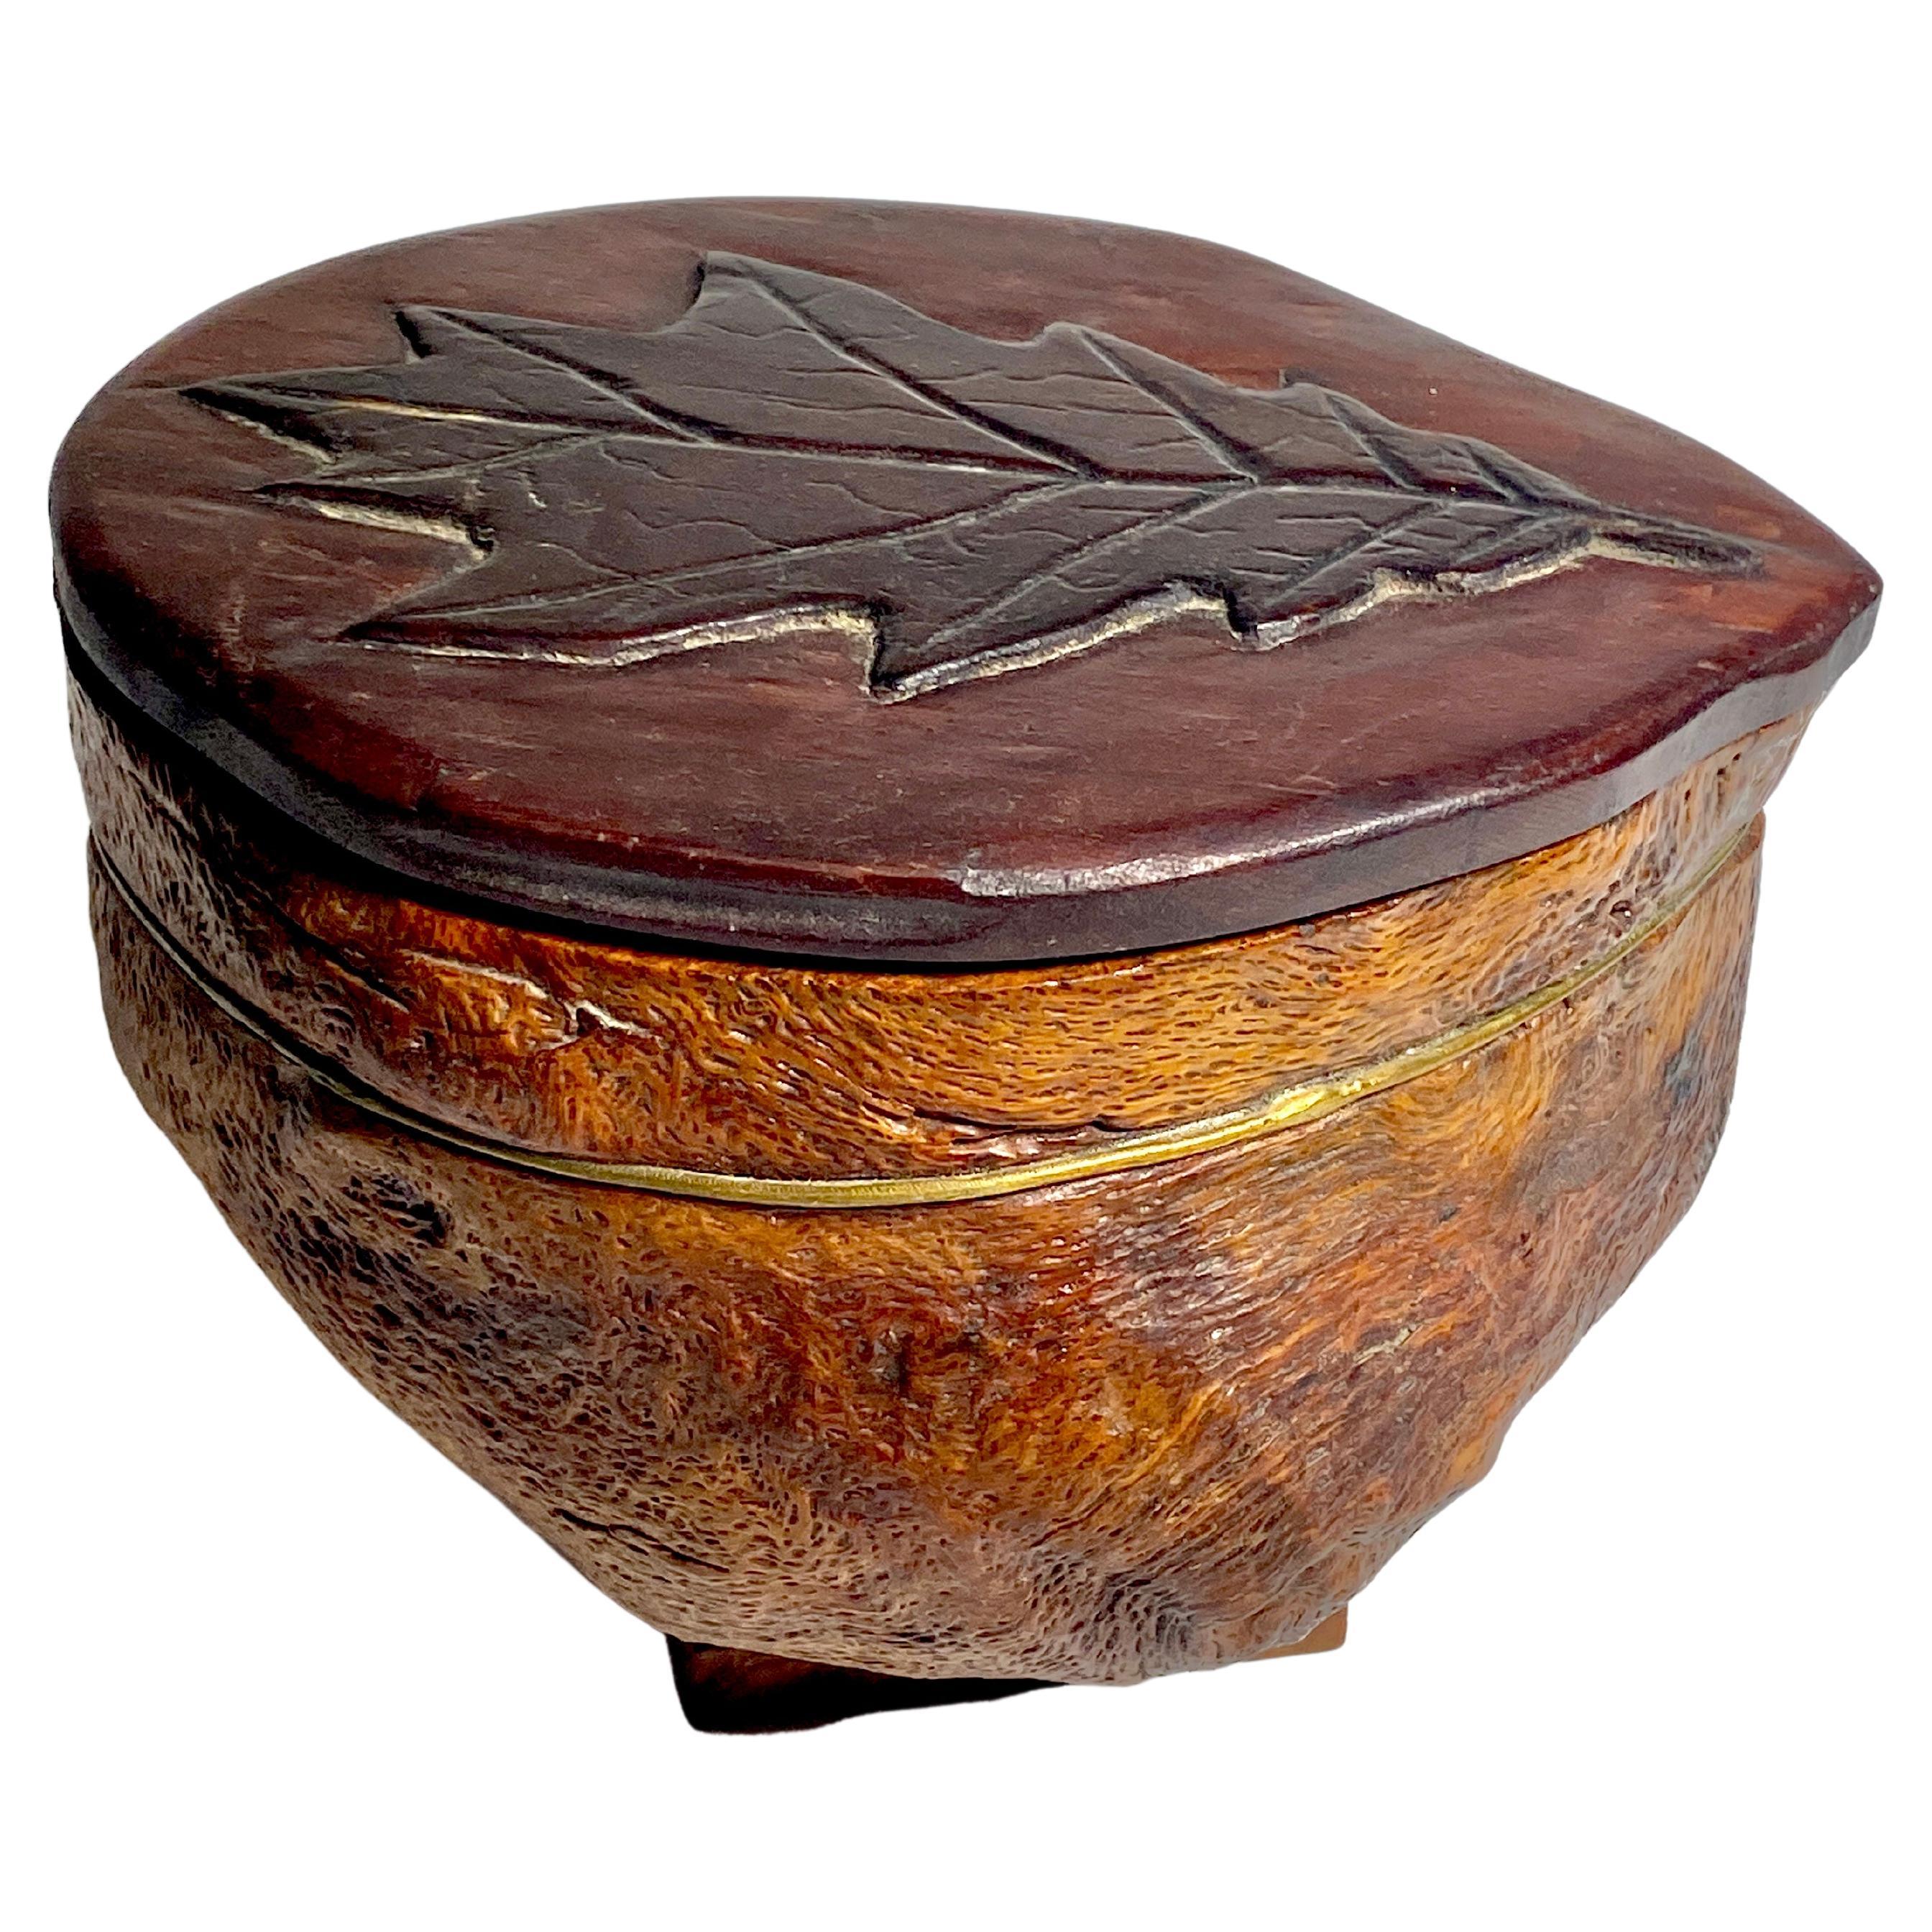 Tabacco Pot, in Wood and Brass, Brown Color, French, 1970 For Sale